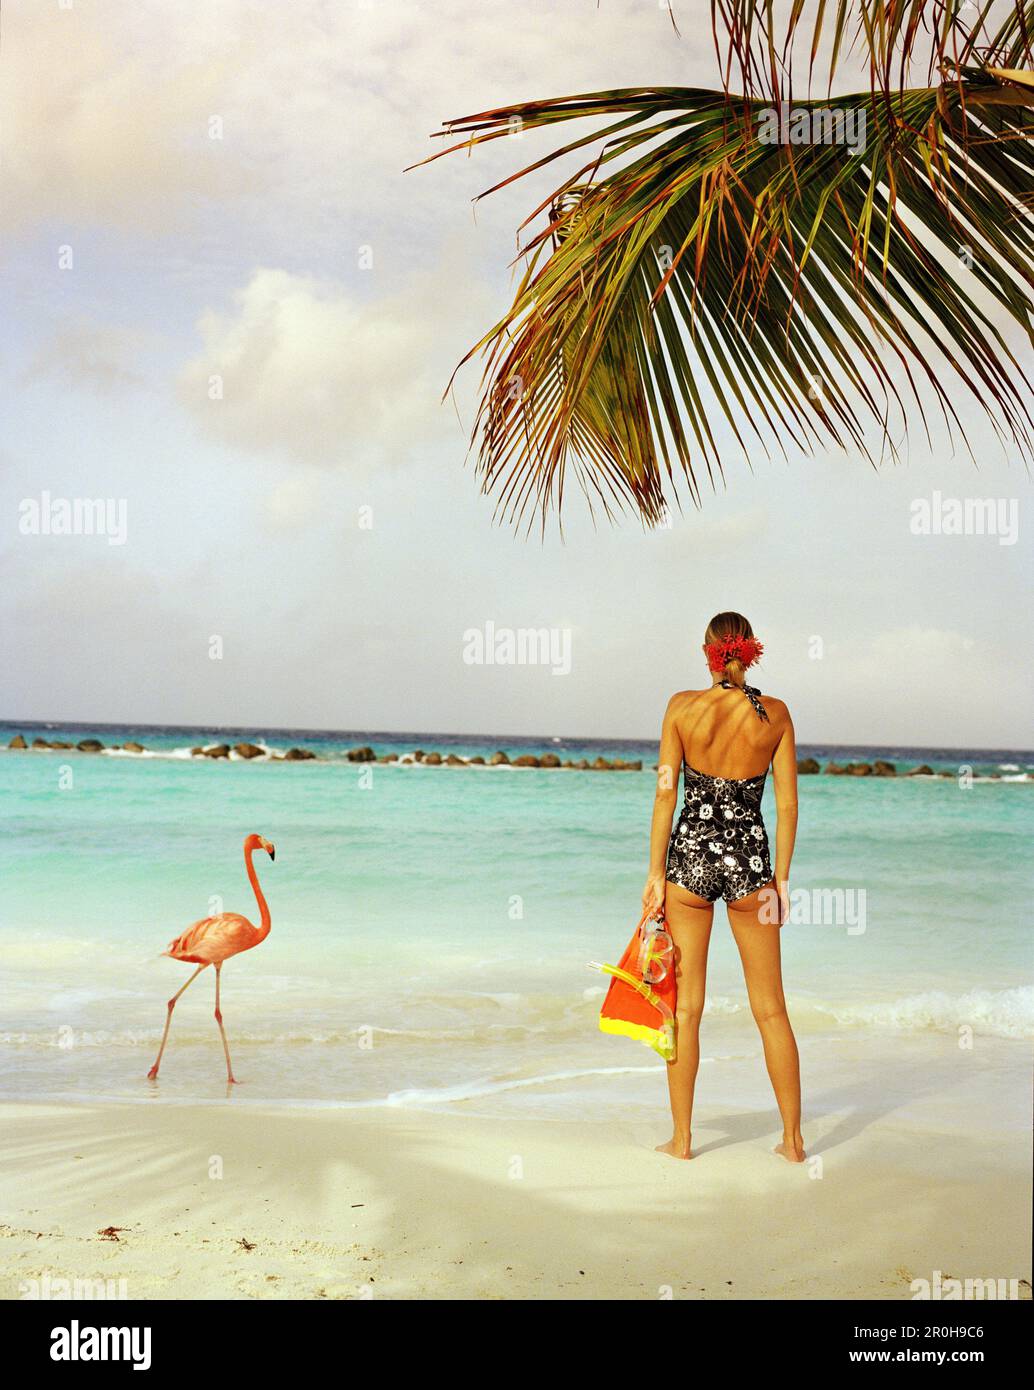 ARUBA, portrait of young woman standing on the beach in the middle of Pink Flamingos, Renaissance Island Stock Photo